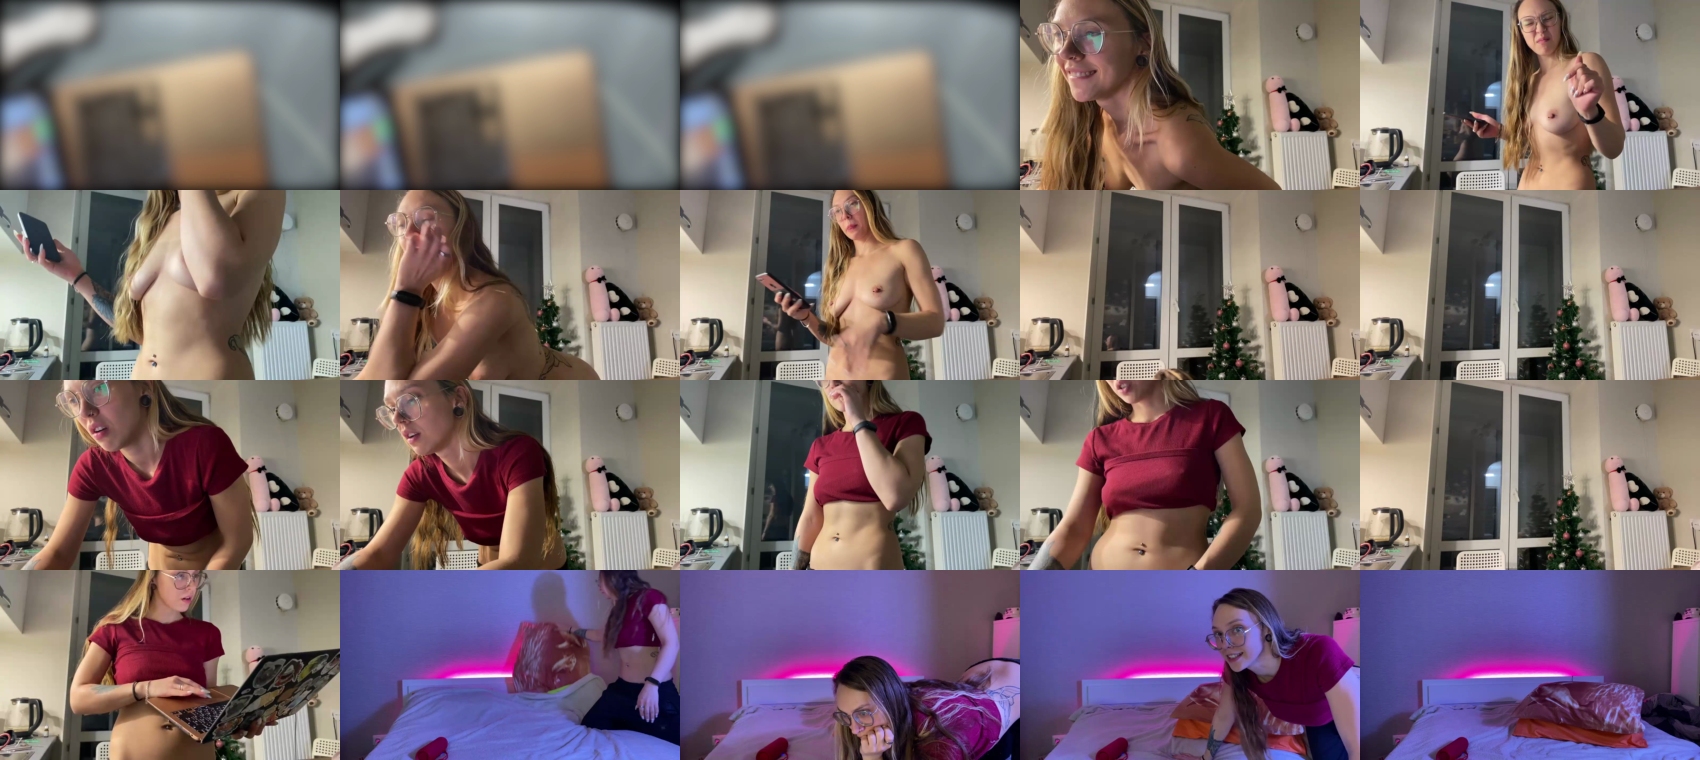 lisamelow shemale CAM SHOW @ Chaturbate 20-01-2023